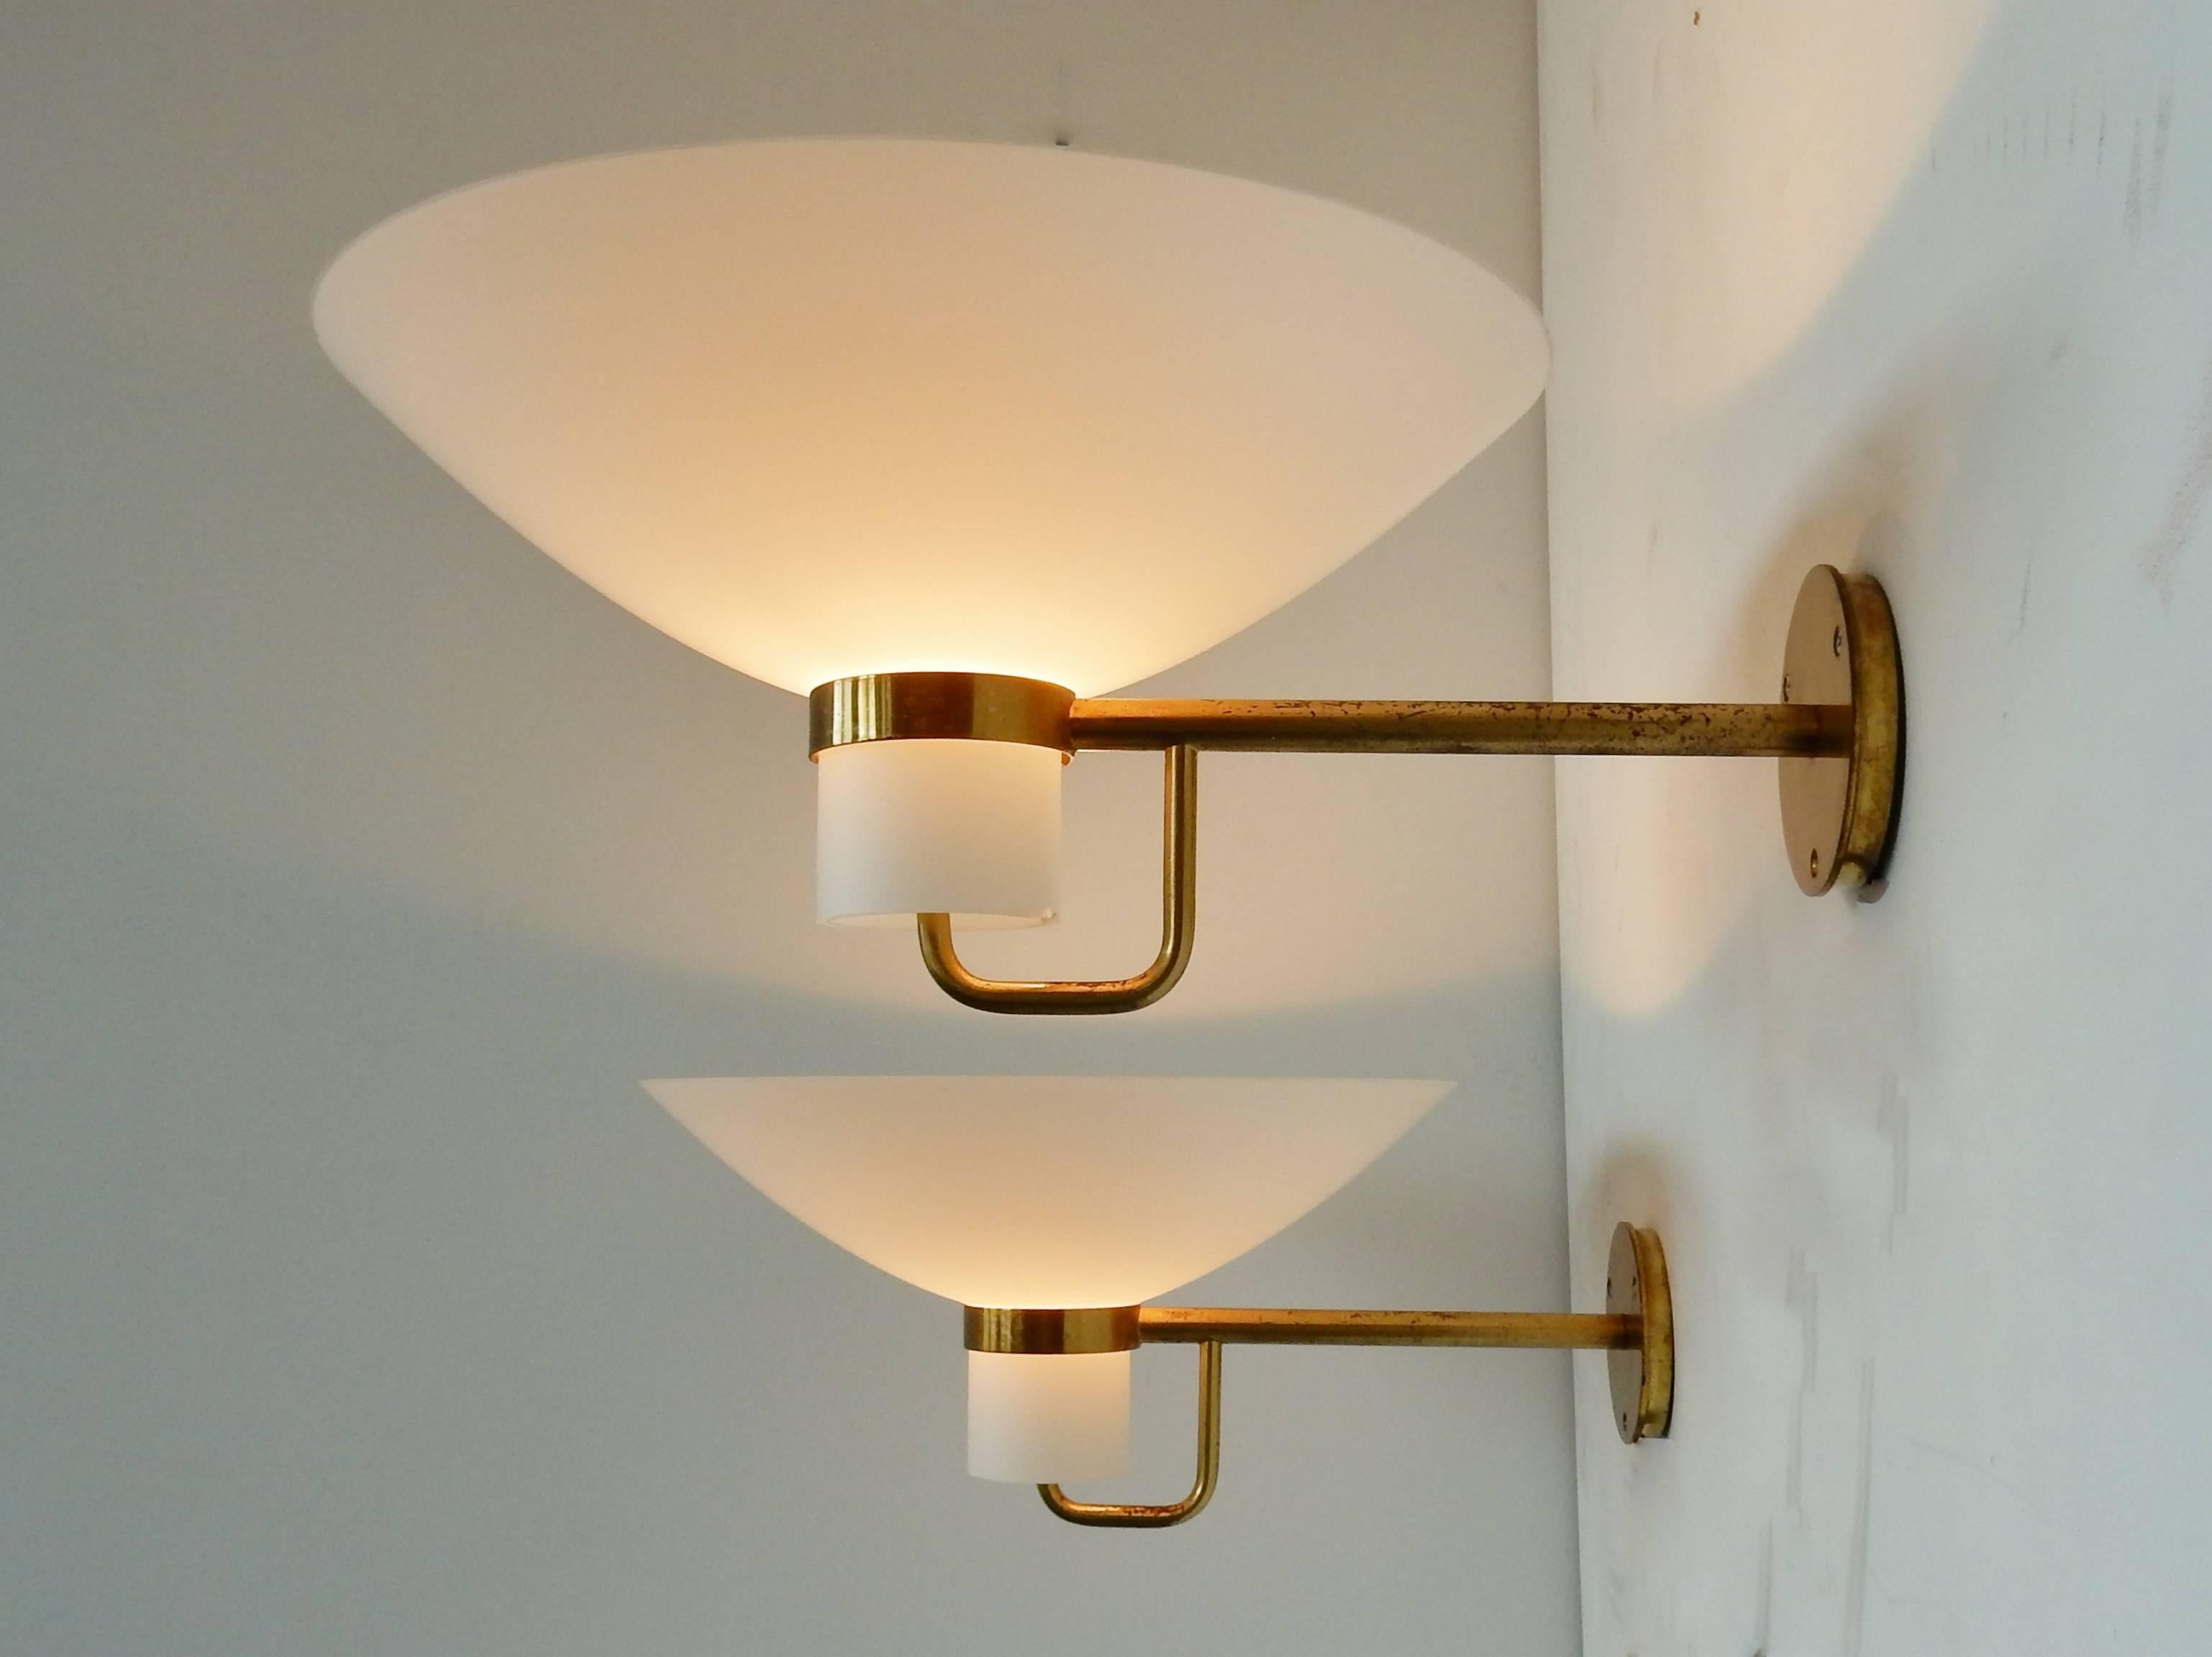 This set of two wall lights are an amazing set of two. With some smaller chips to one glass and a close to perfect other glass, this set is a rare find. The design is very likely to be Scandinavian and presumably Swedish. We have this model